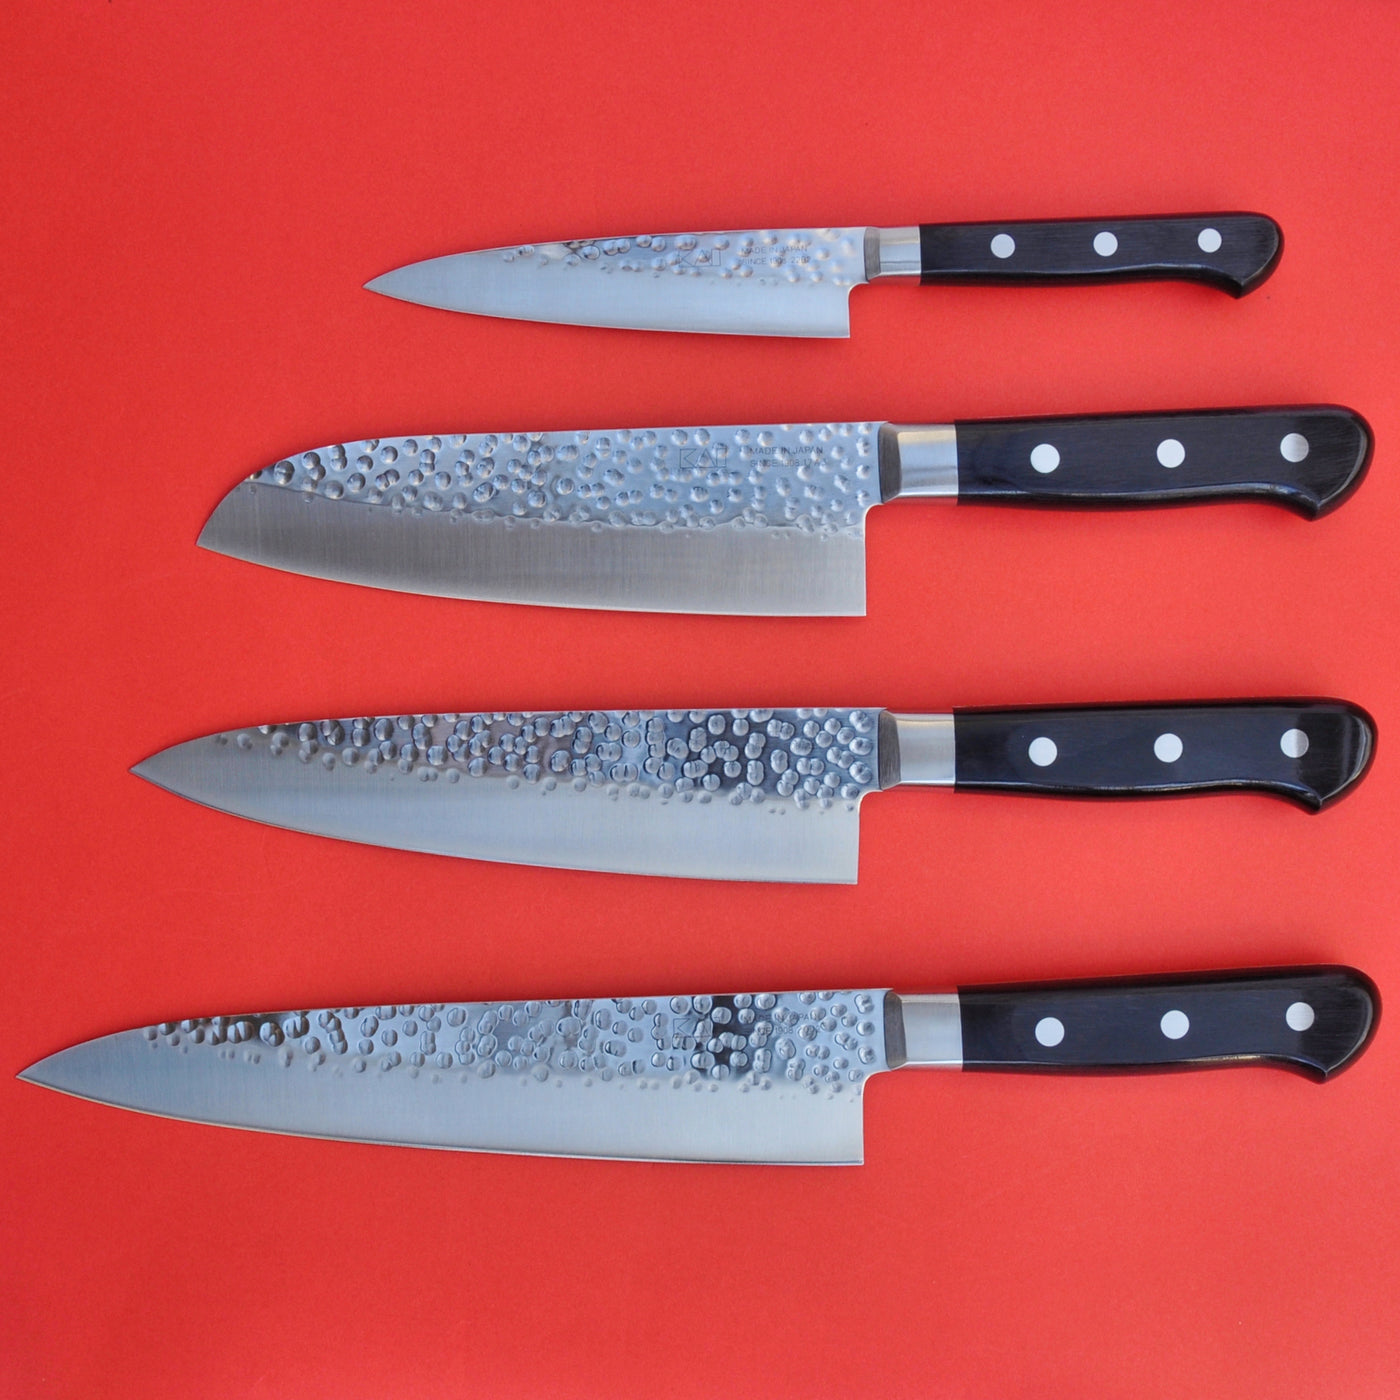 Set of all 4 Japanese knives